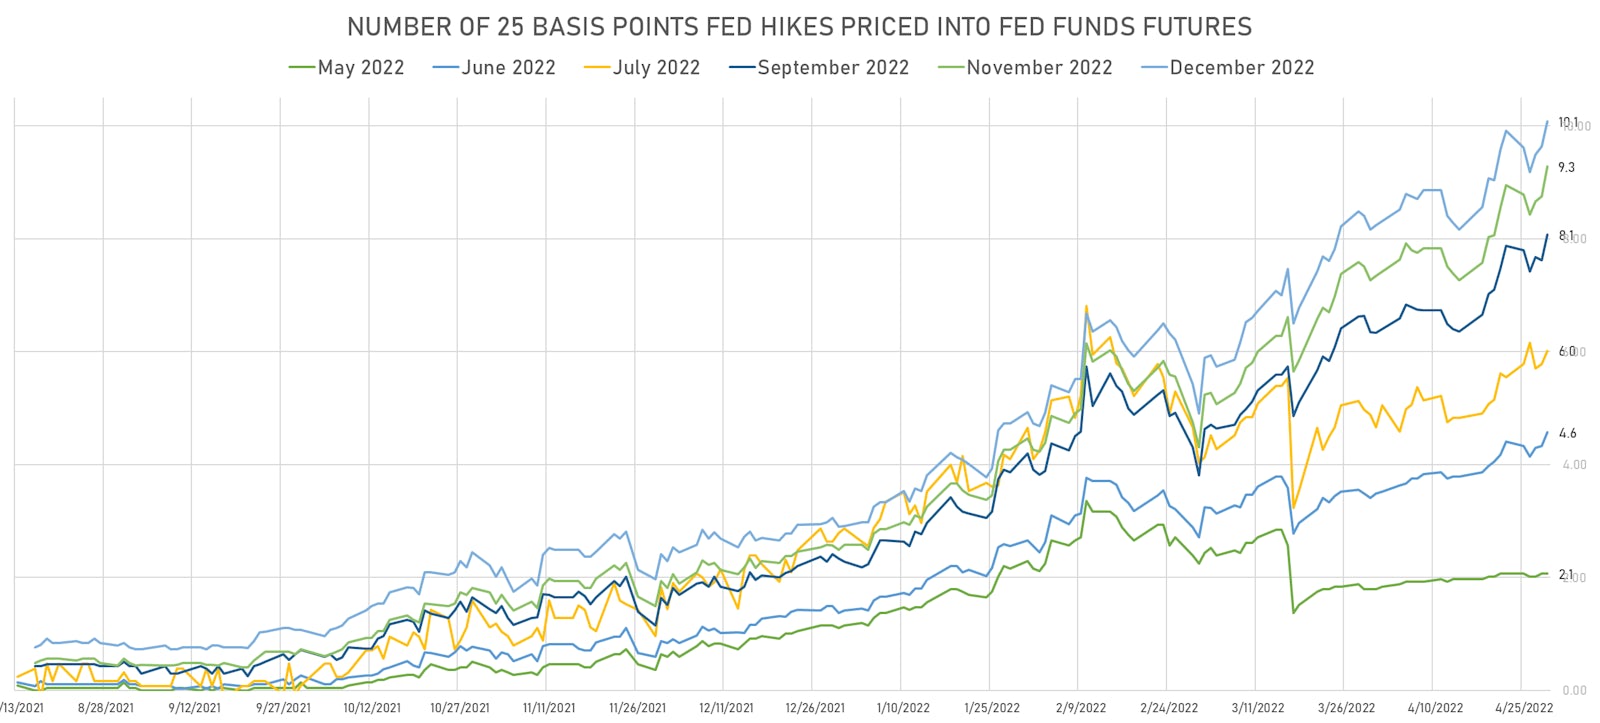 Additional Fed Hikes This Year Priced Into Fed Funds Futures | Sources: ϕpost, Refinitiv data